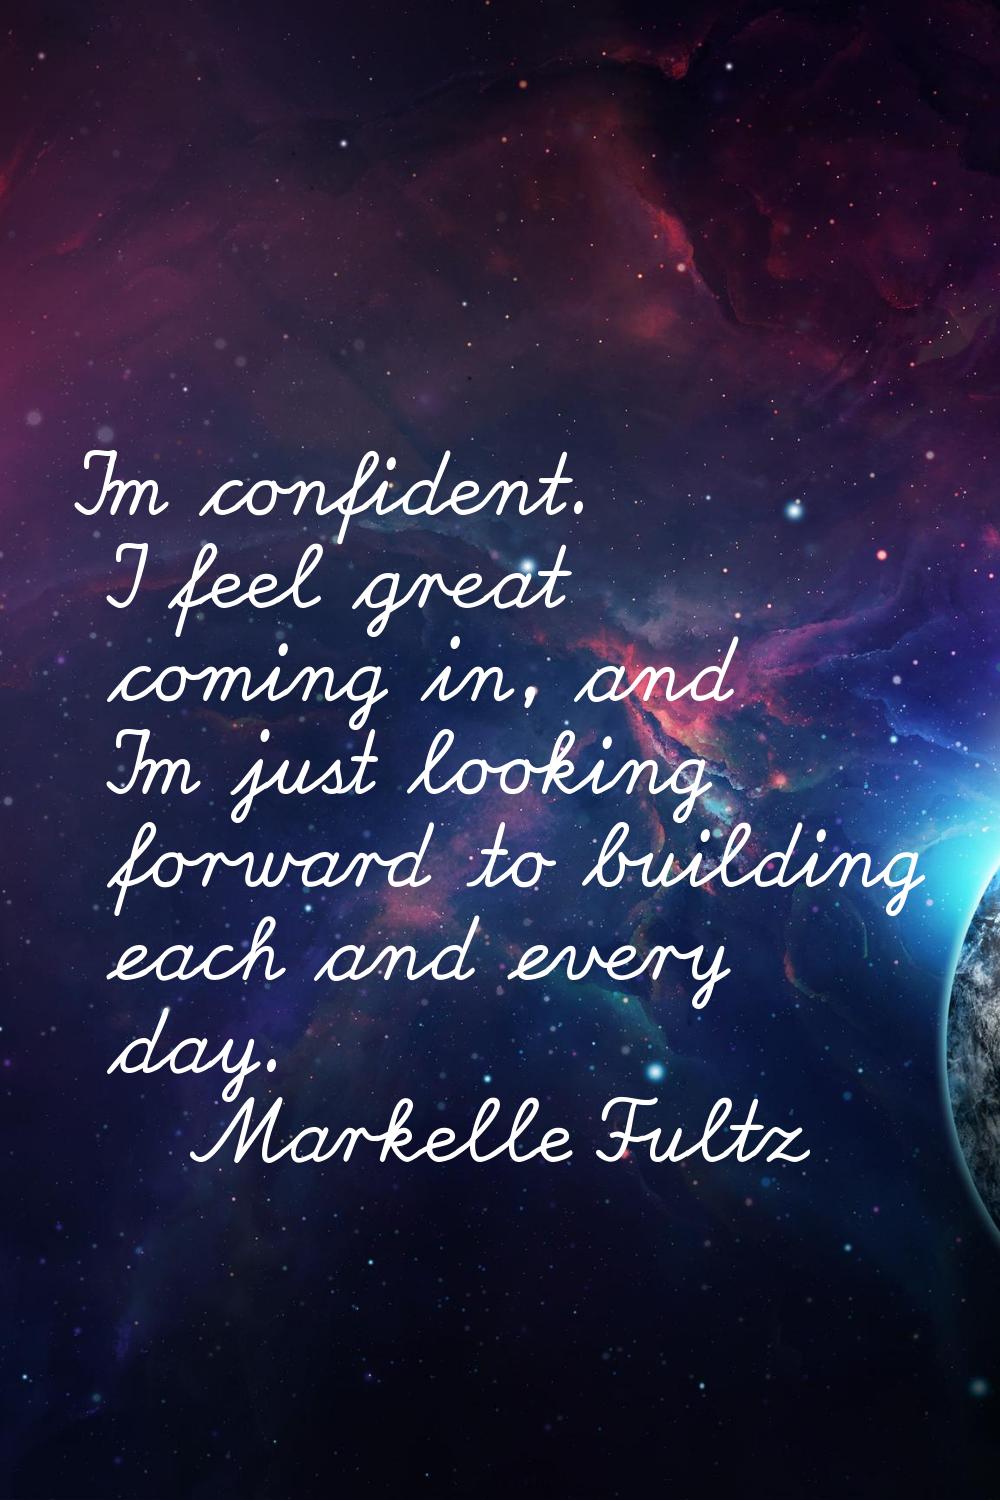 I'm confident. I feel great coming in, and I'm just looking forward to building each and every day.